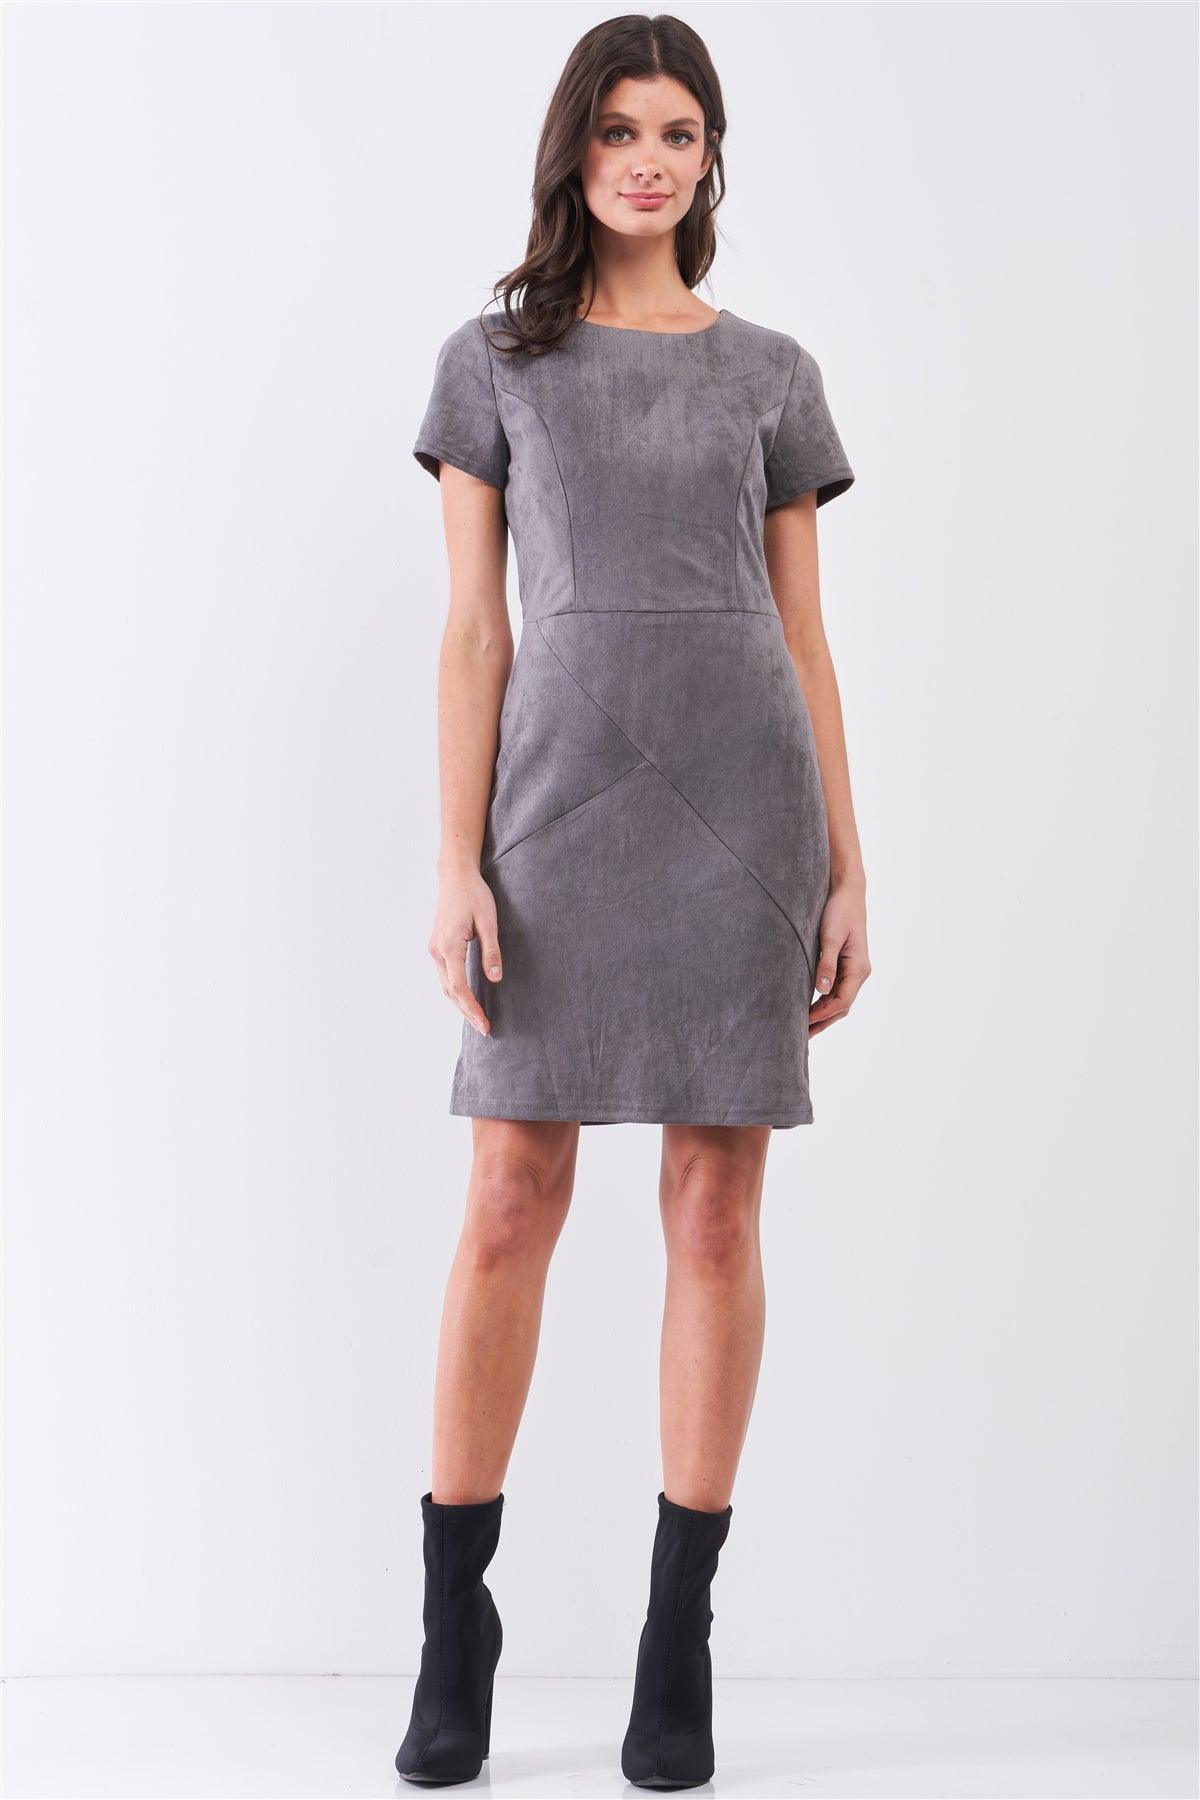 Heather Grey Faux Suede Short Sleeve Round Neck Fitted Mini Dress /2-3-2